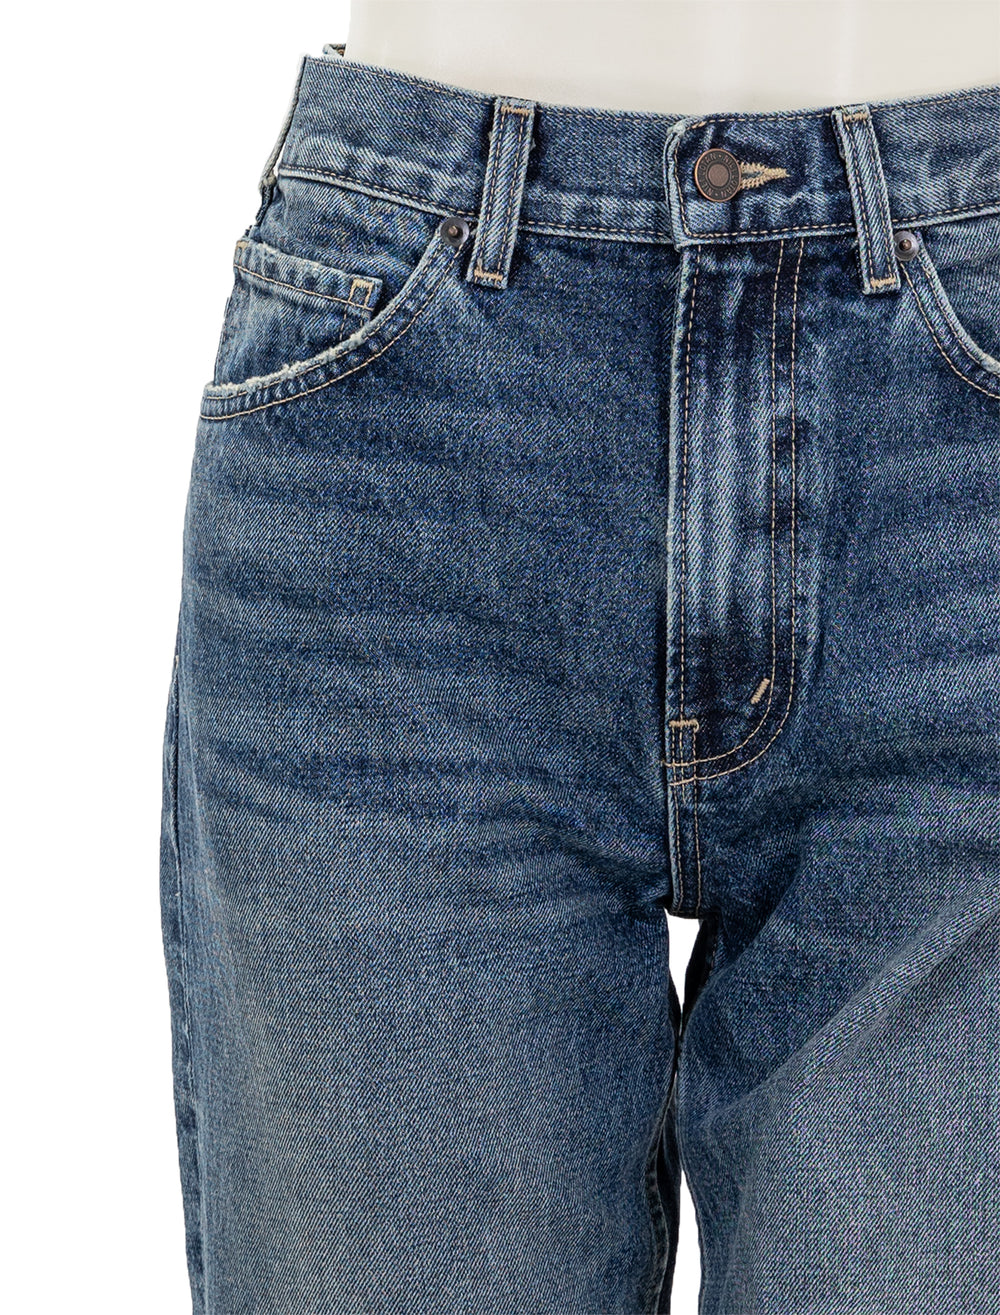 Close-up view of Nili Lotan's mitchell jean in ocean wash.